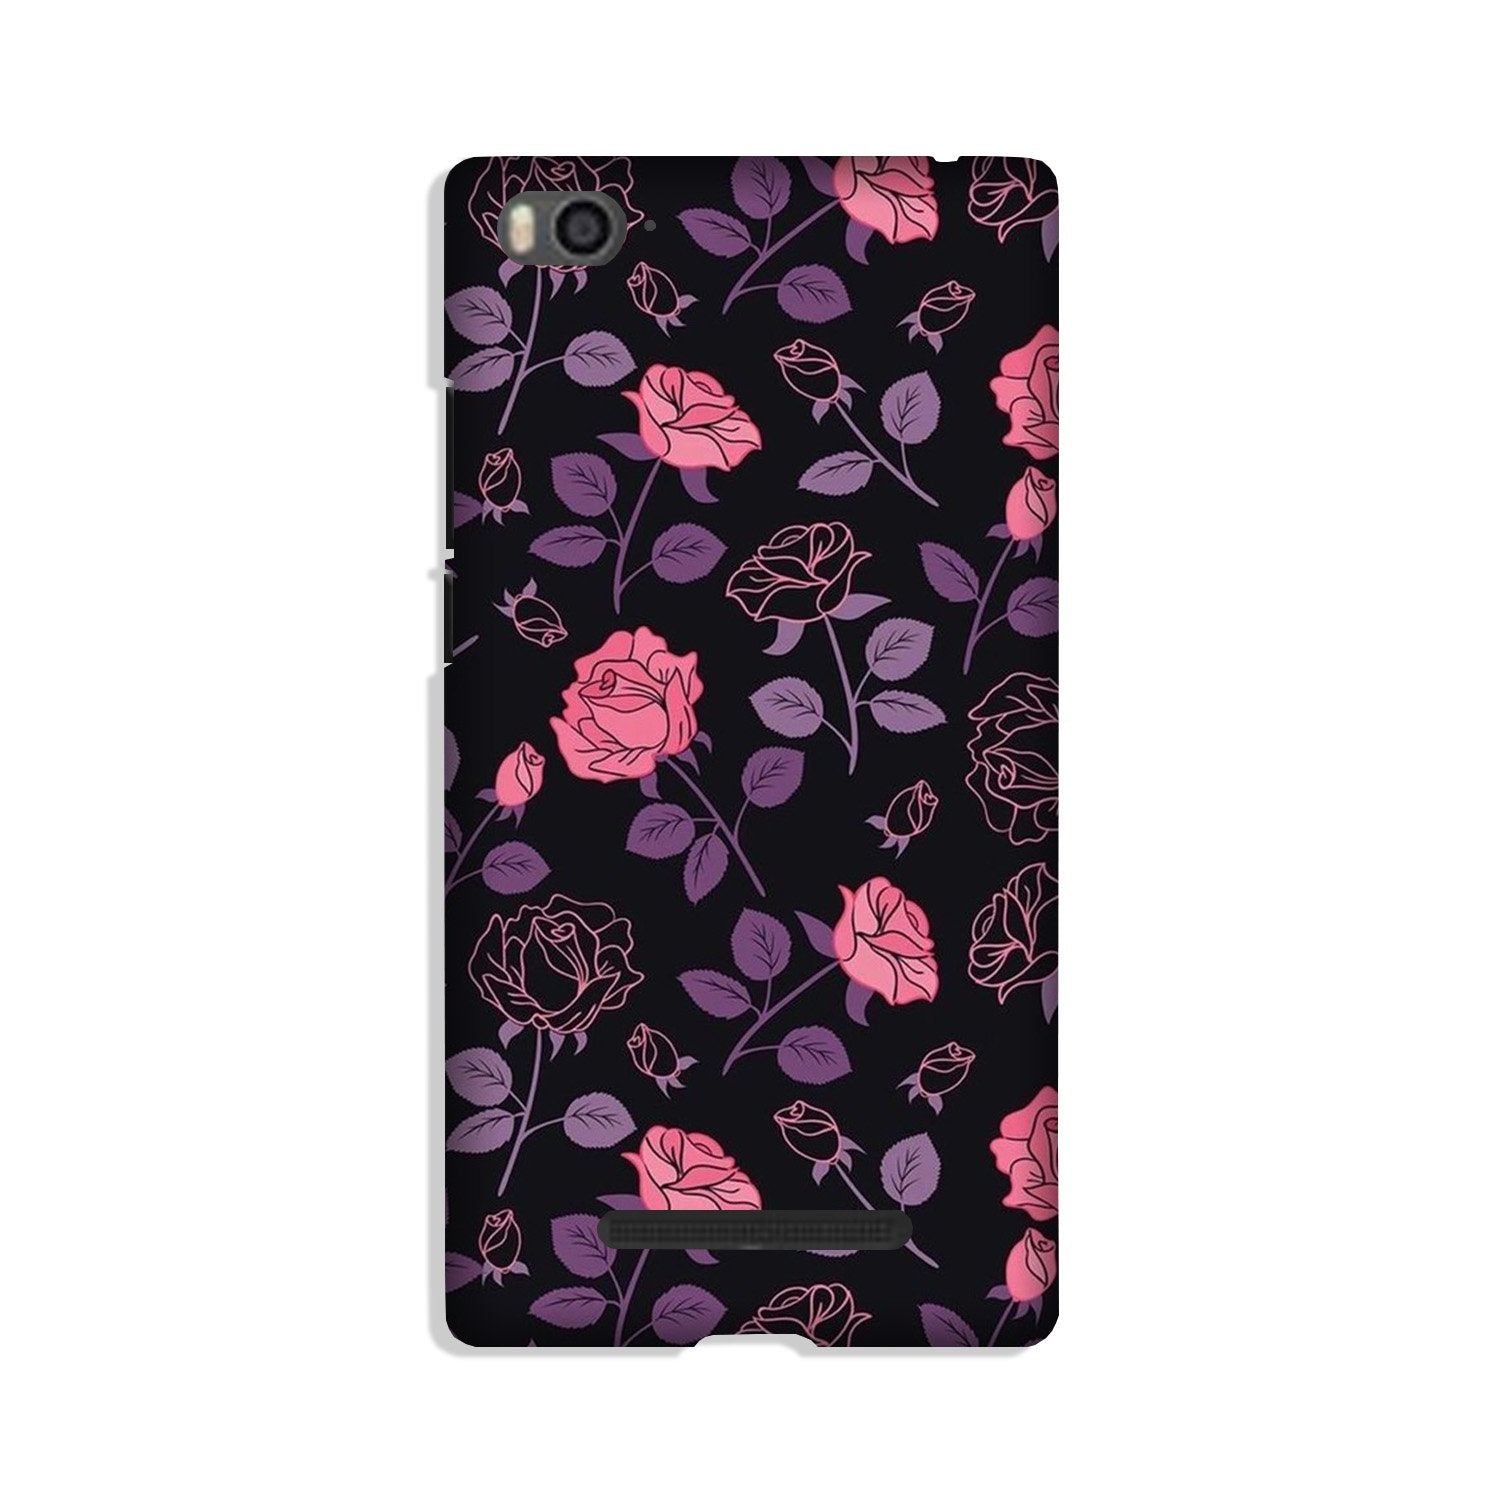 Rose Pattern Case for Redmi 4A